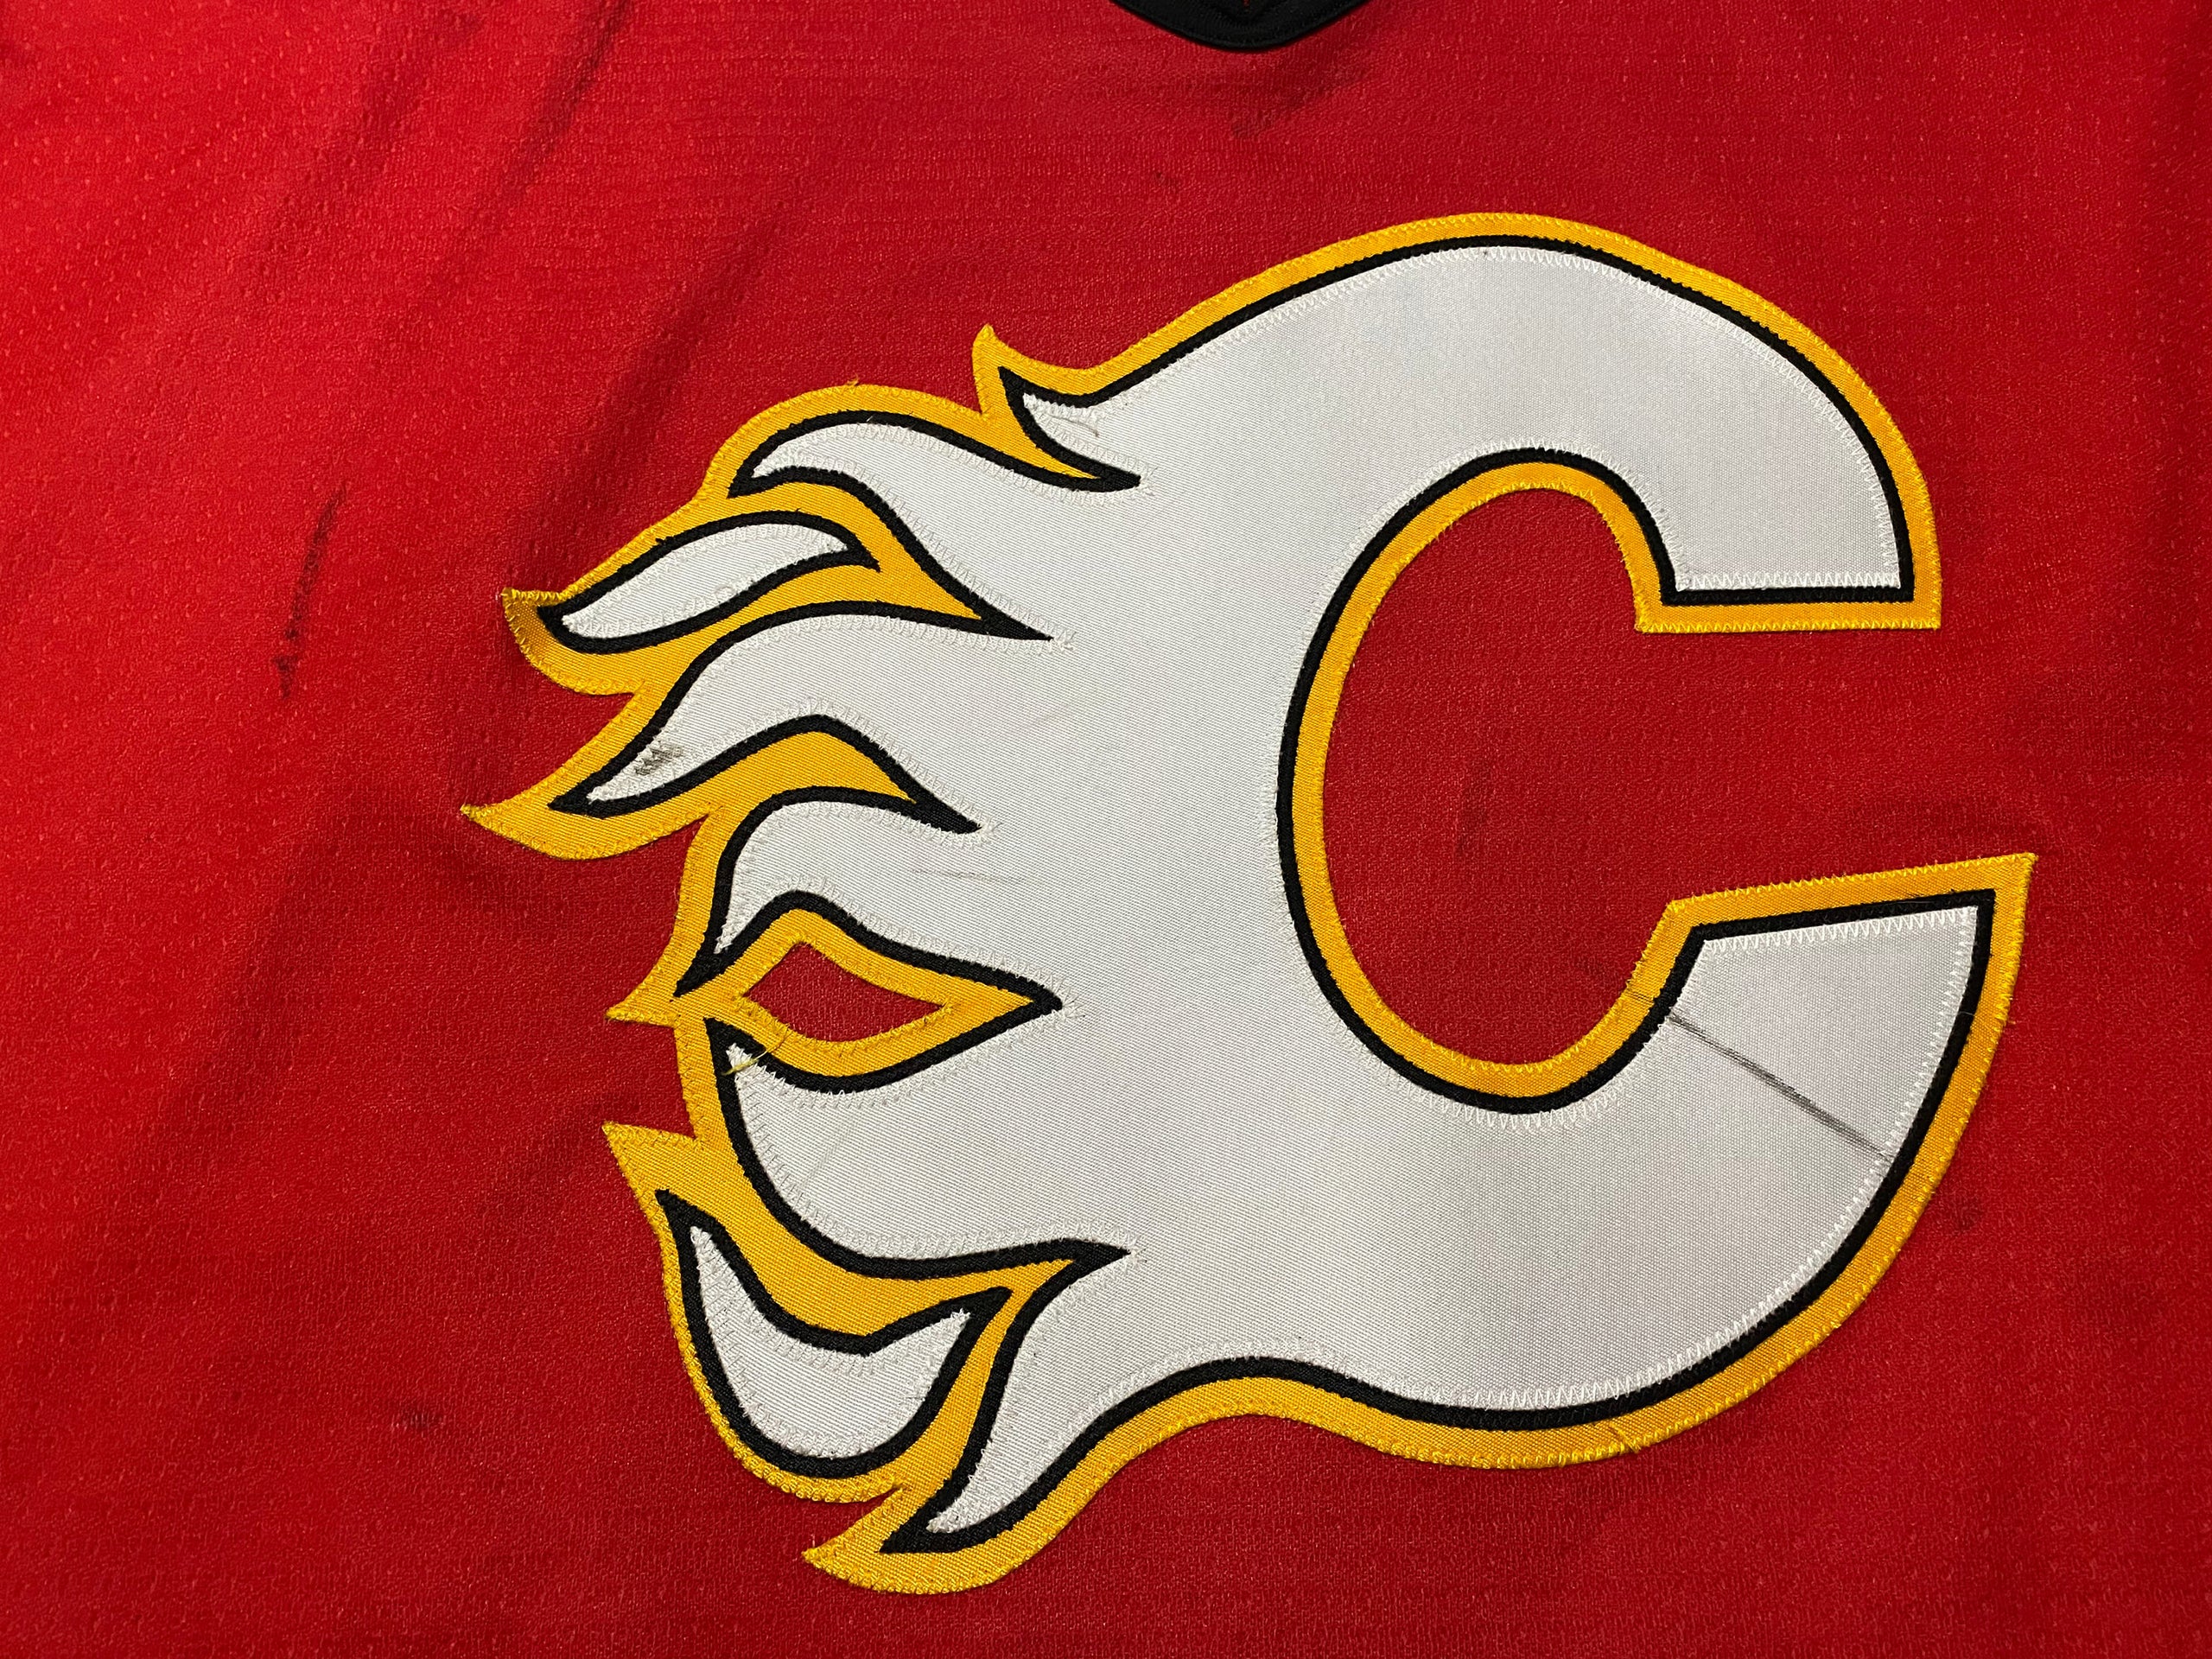 Martin St. Louis 99'00 ROOKIE Horsehead Calgary Flames Game Worn Jersey